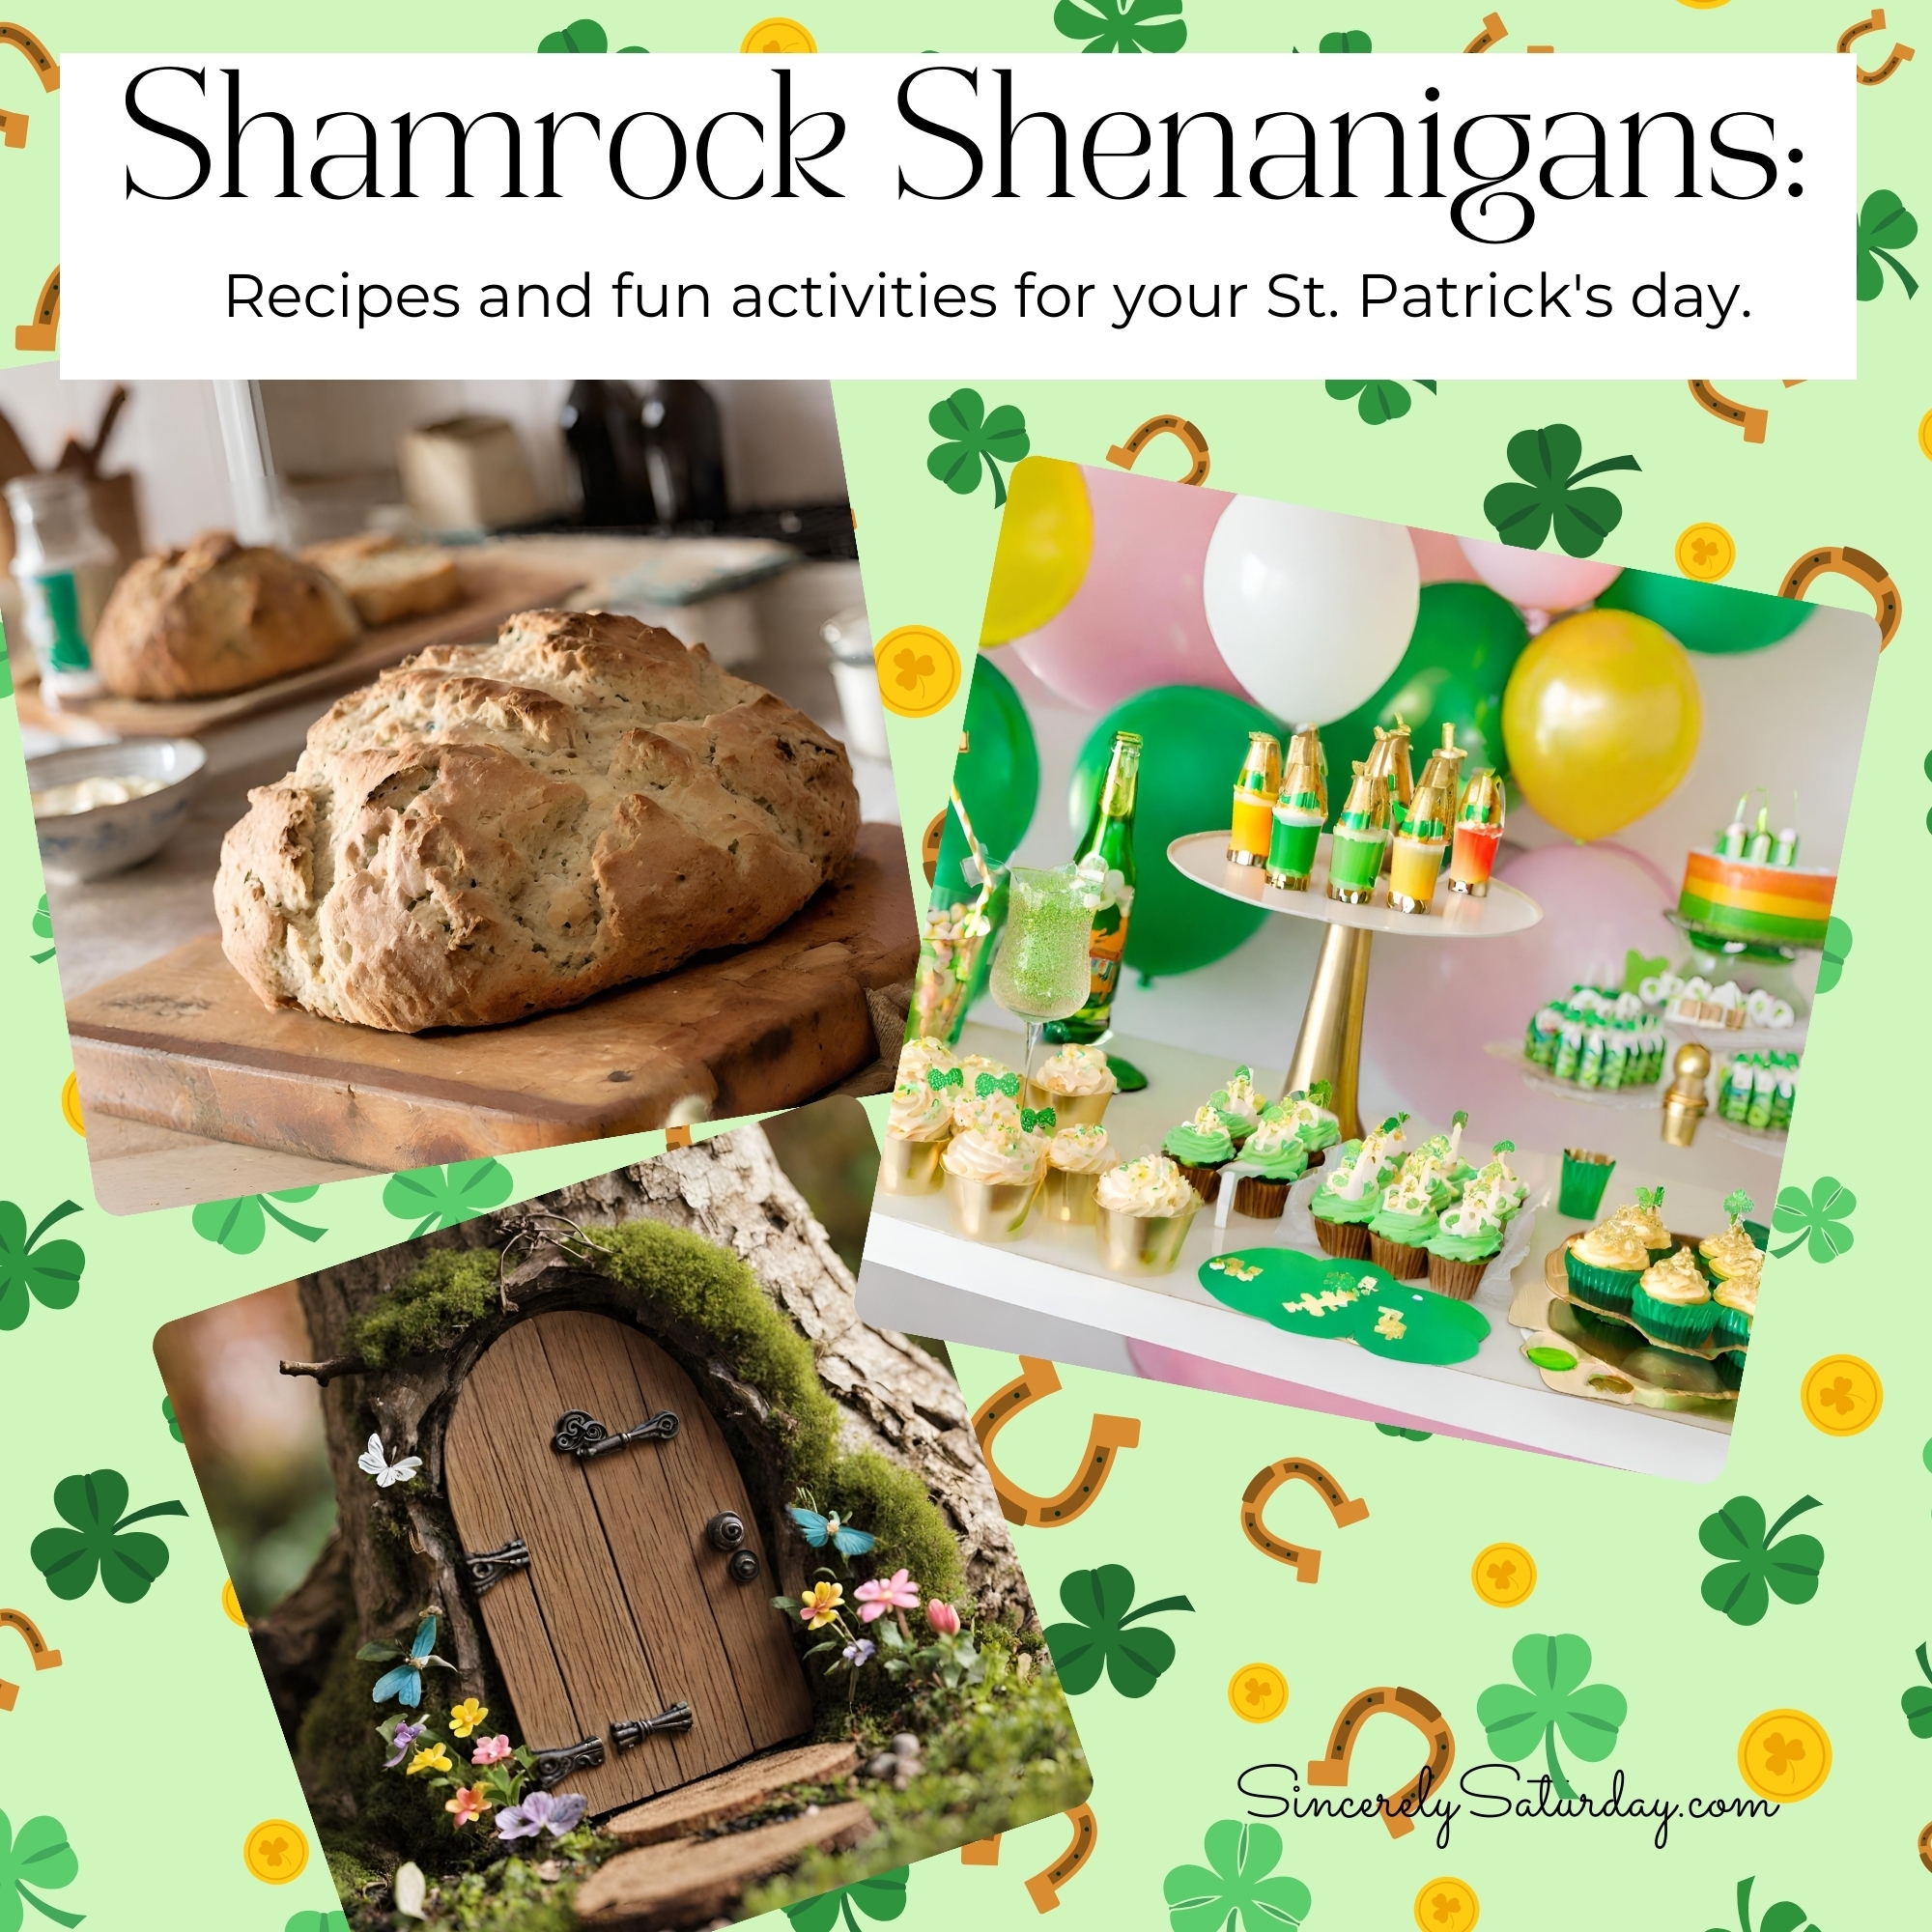 Embrace the Green: St. Patrick's Day with a Dash of Irish Heritage!